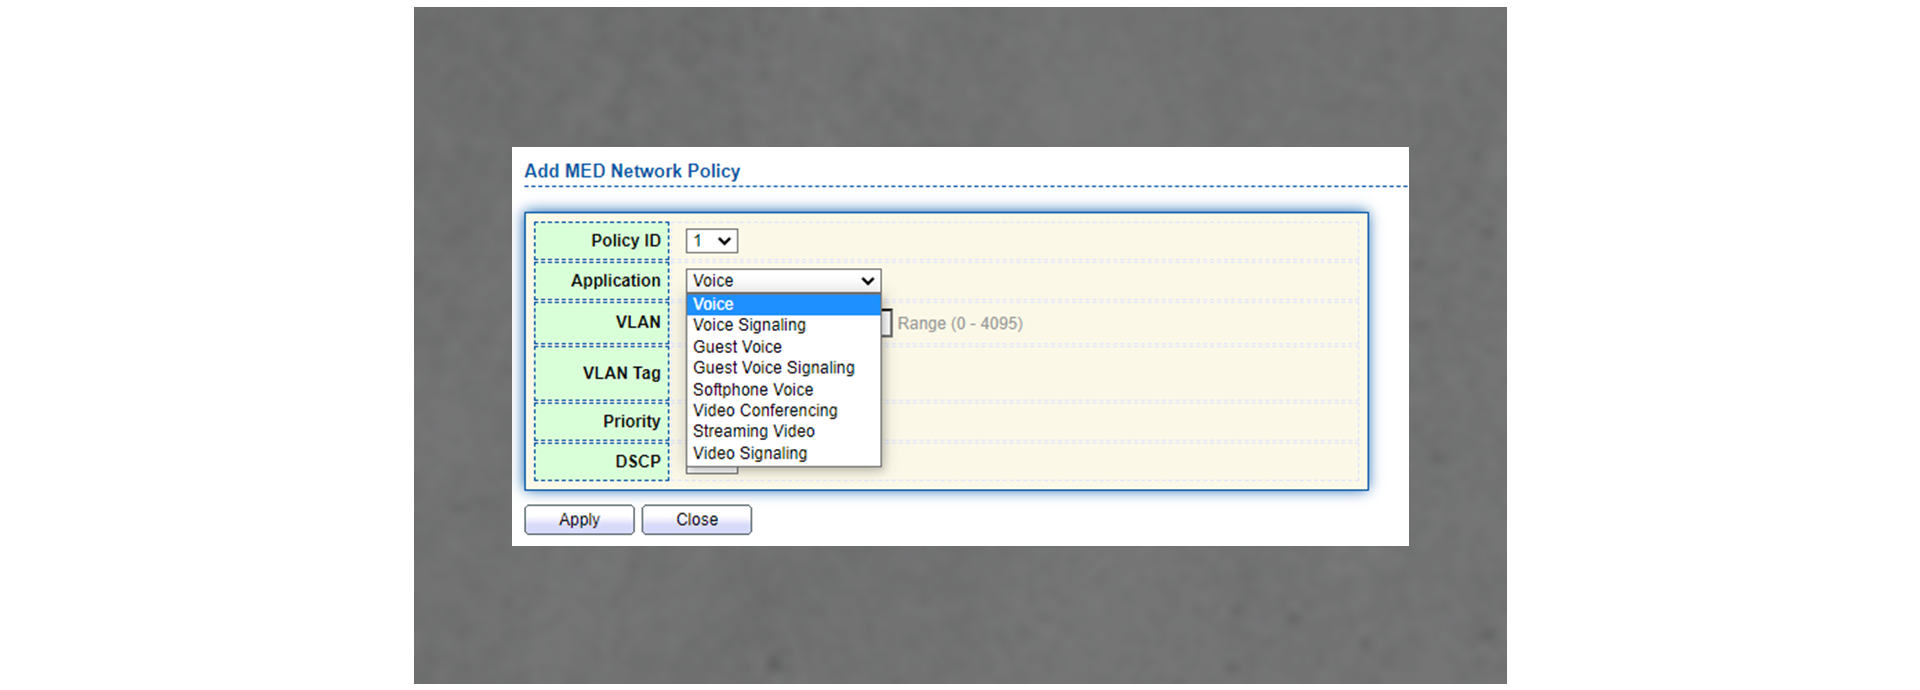 VLAN Policy for Video Conferring/Voice/Data